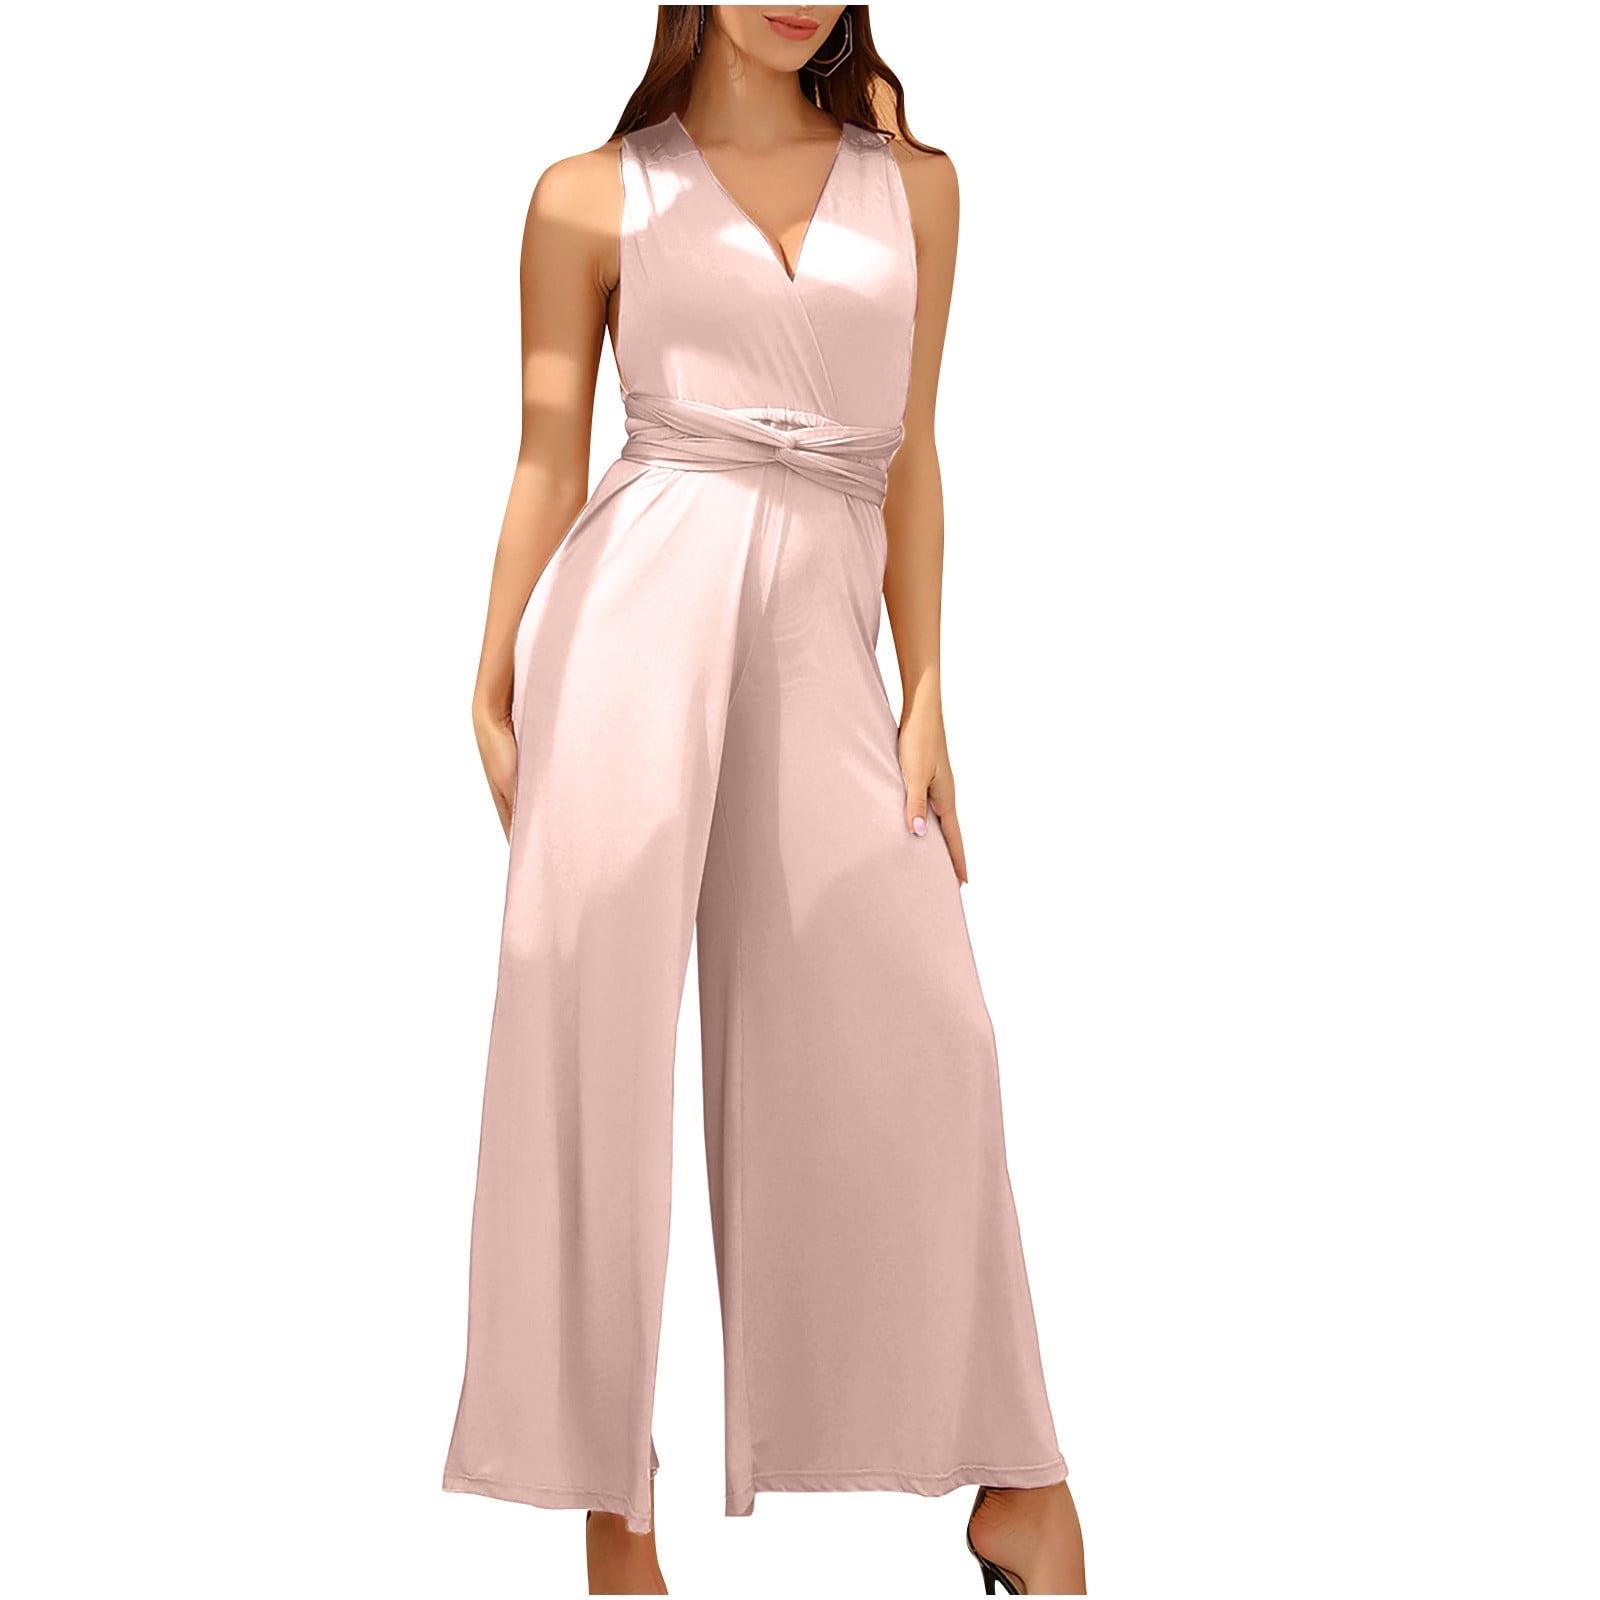 QUYUON Elegant Jumpsuits for Women Dressy Wedding Guest Ladies Rompers and  Jumpsuits Casual Loose Wide Leg Jumpsuits Sleeveless V Neck Evening Party